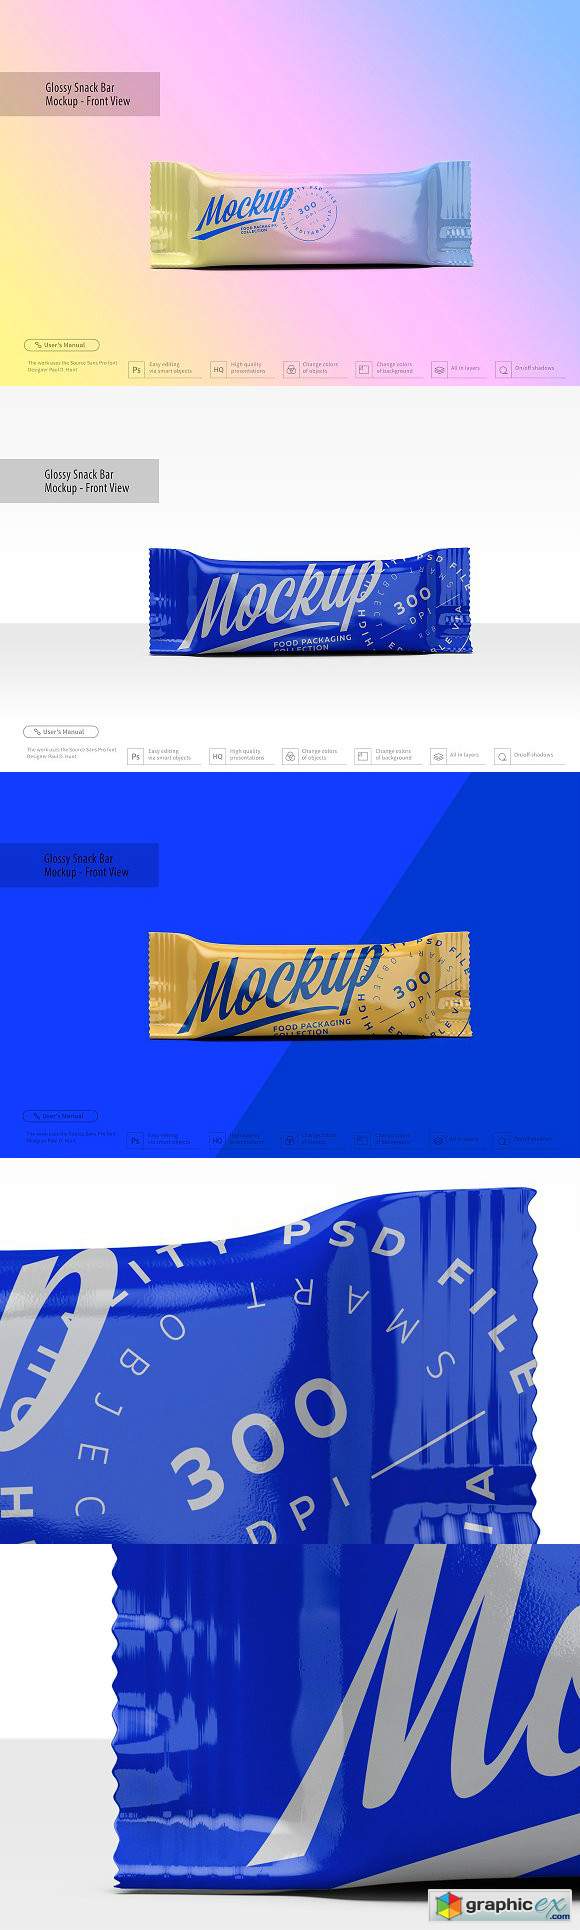 Glossy Snack Bar Mockup - Front View